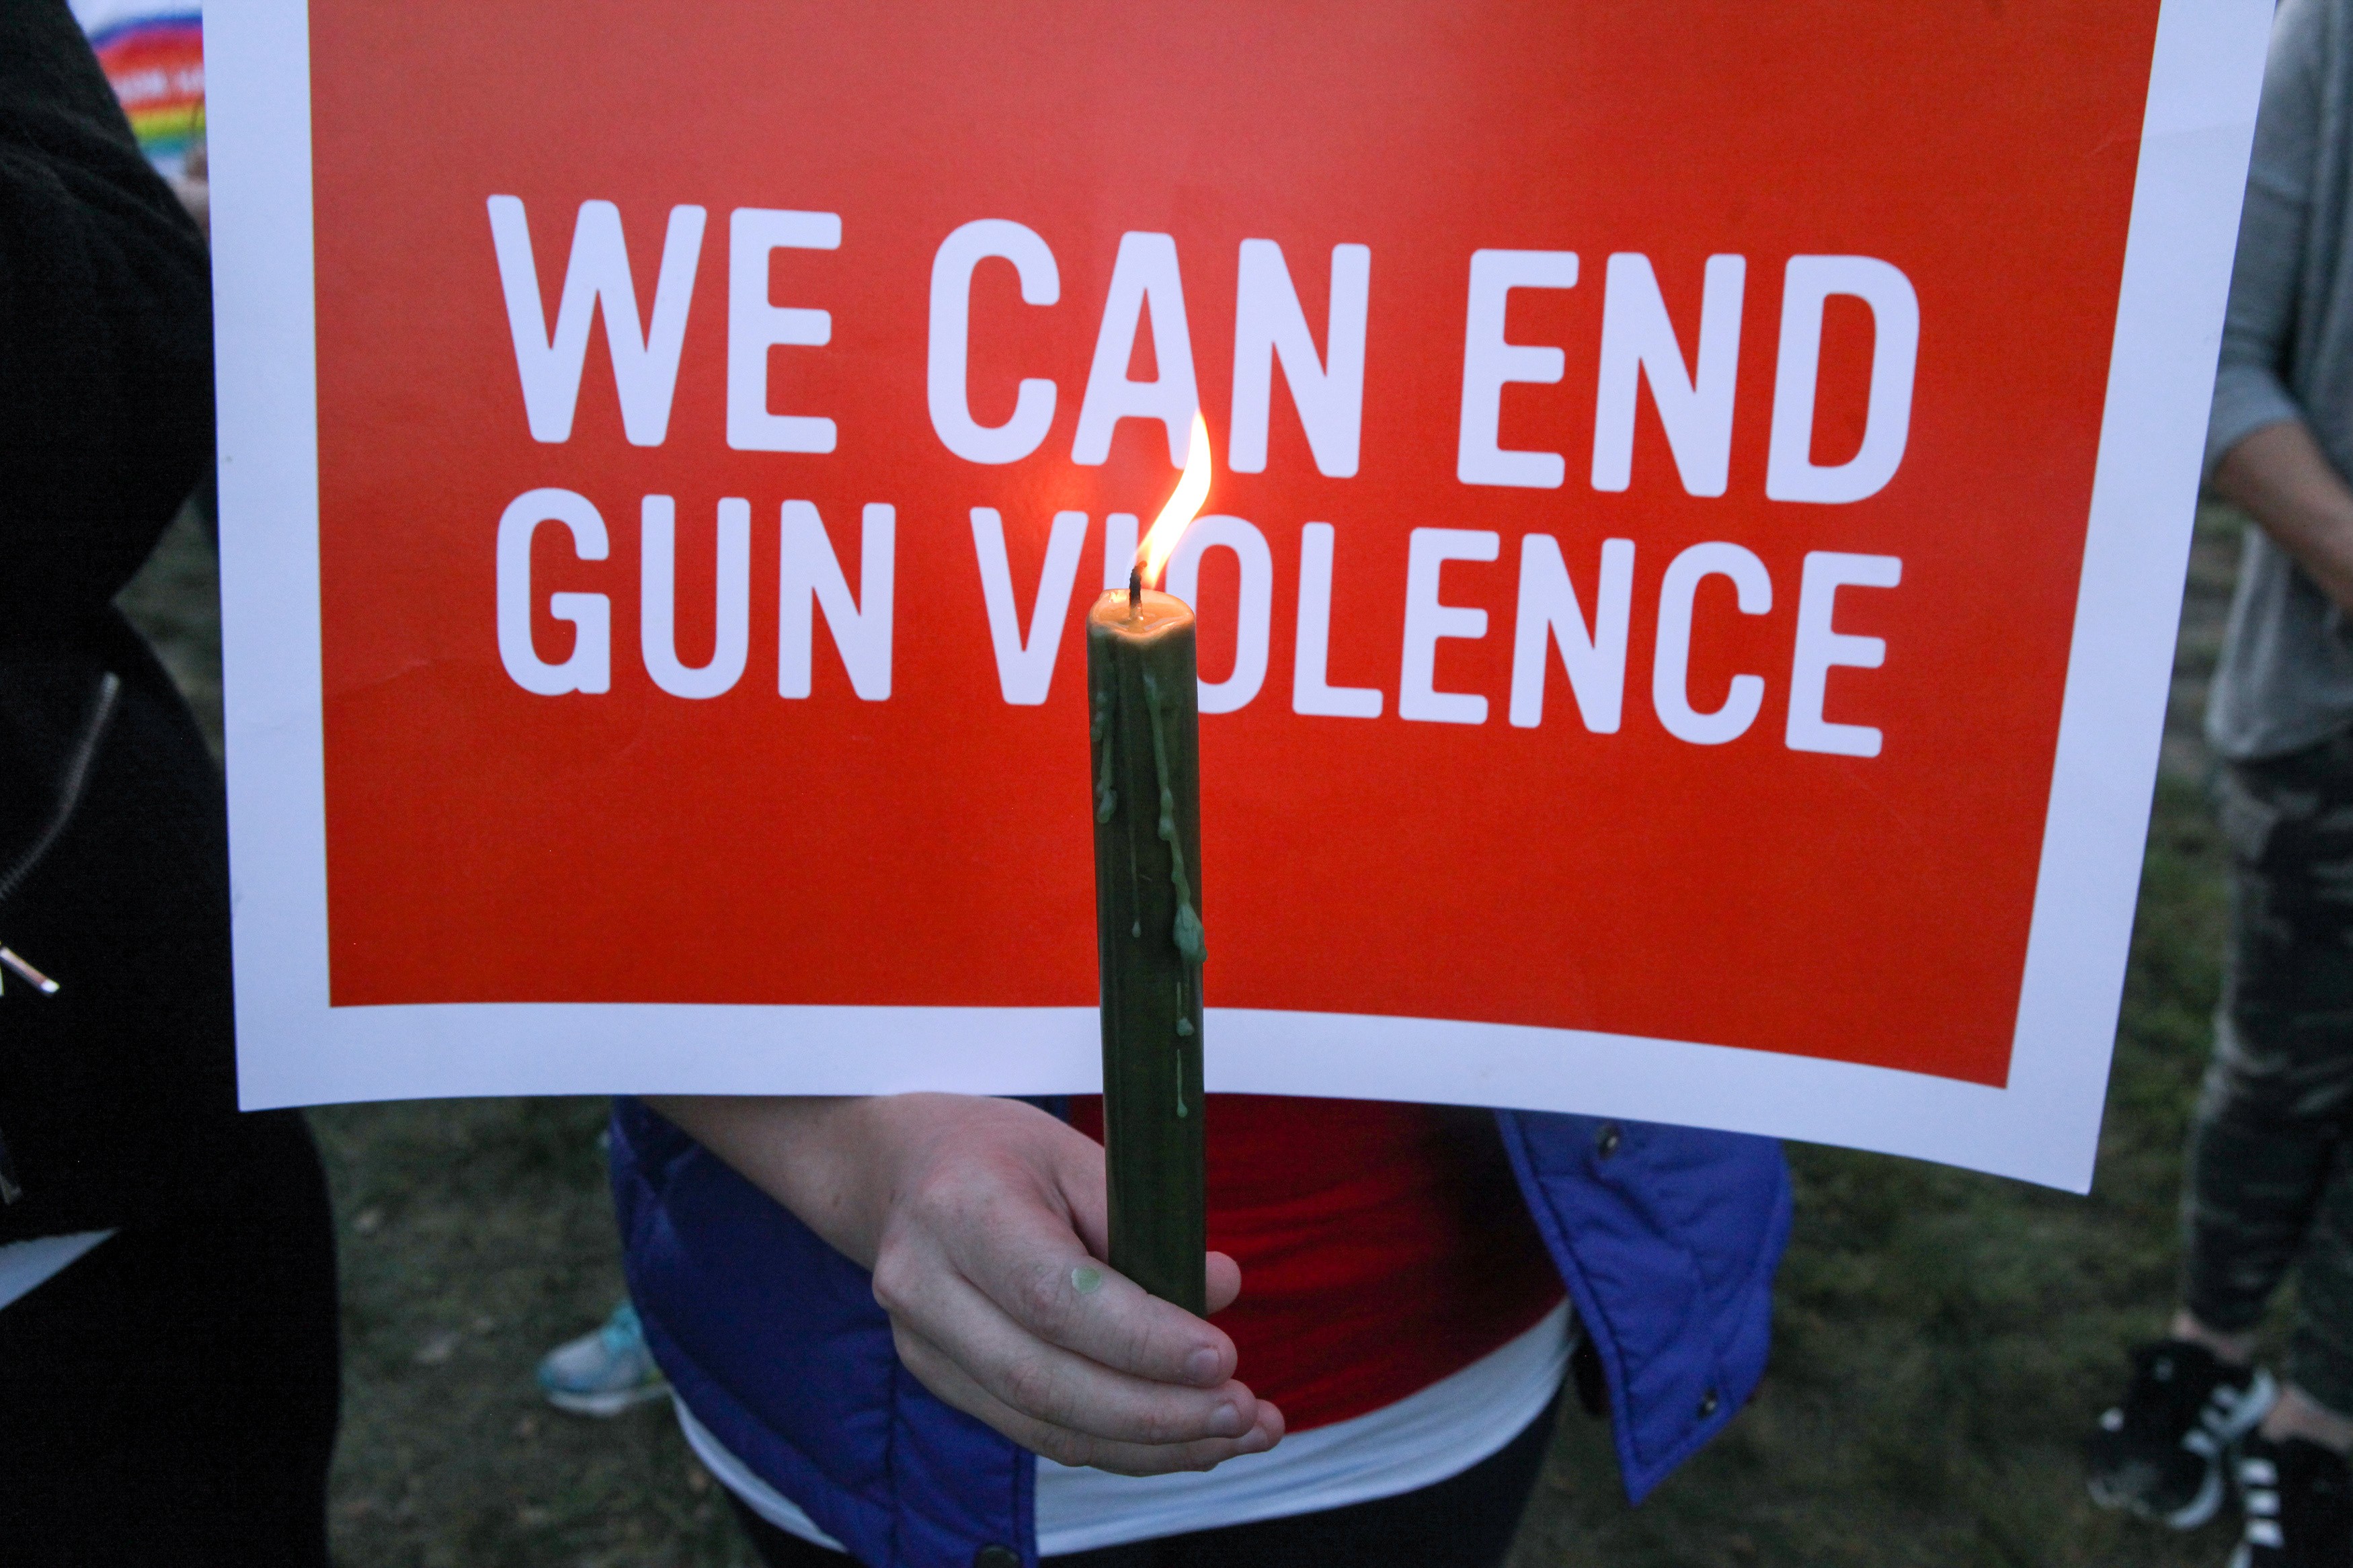 A mourner holds a sign during a vigil in memory of victims of gun violence in the US. Photo: Reuters